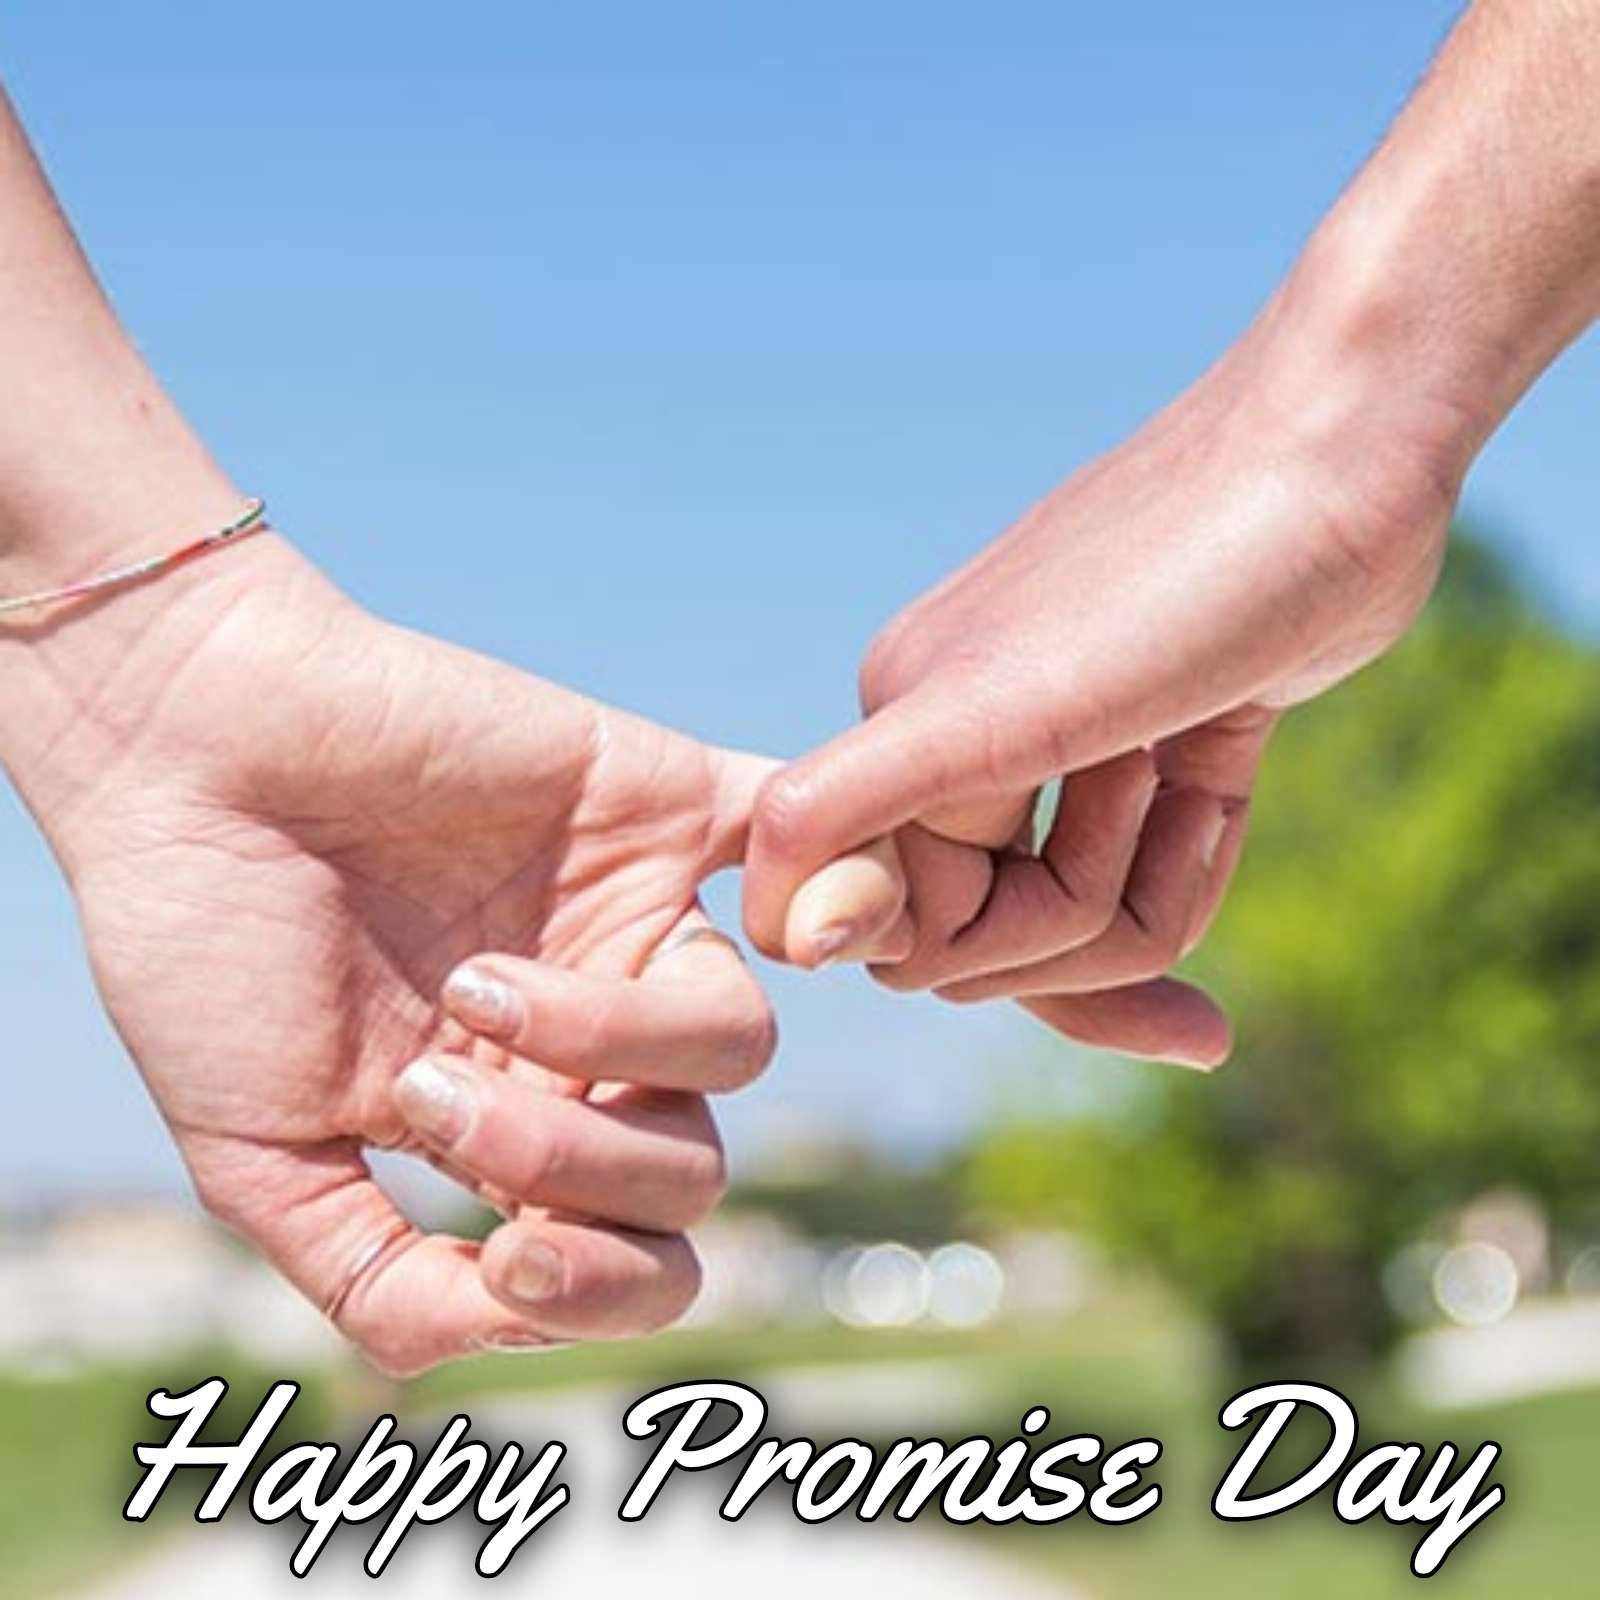 Happy Promise Day Picture Download